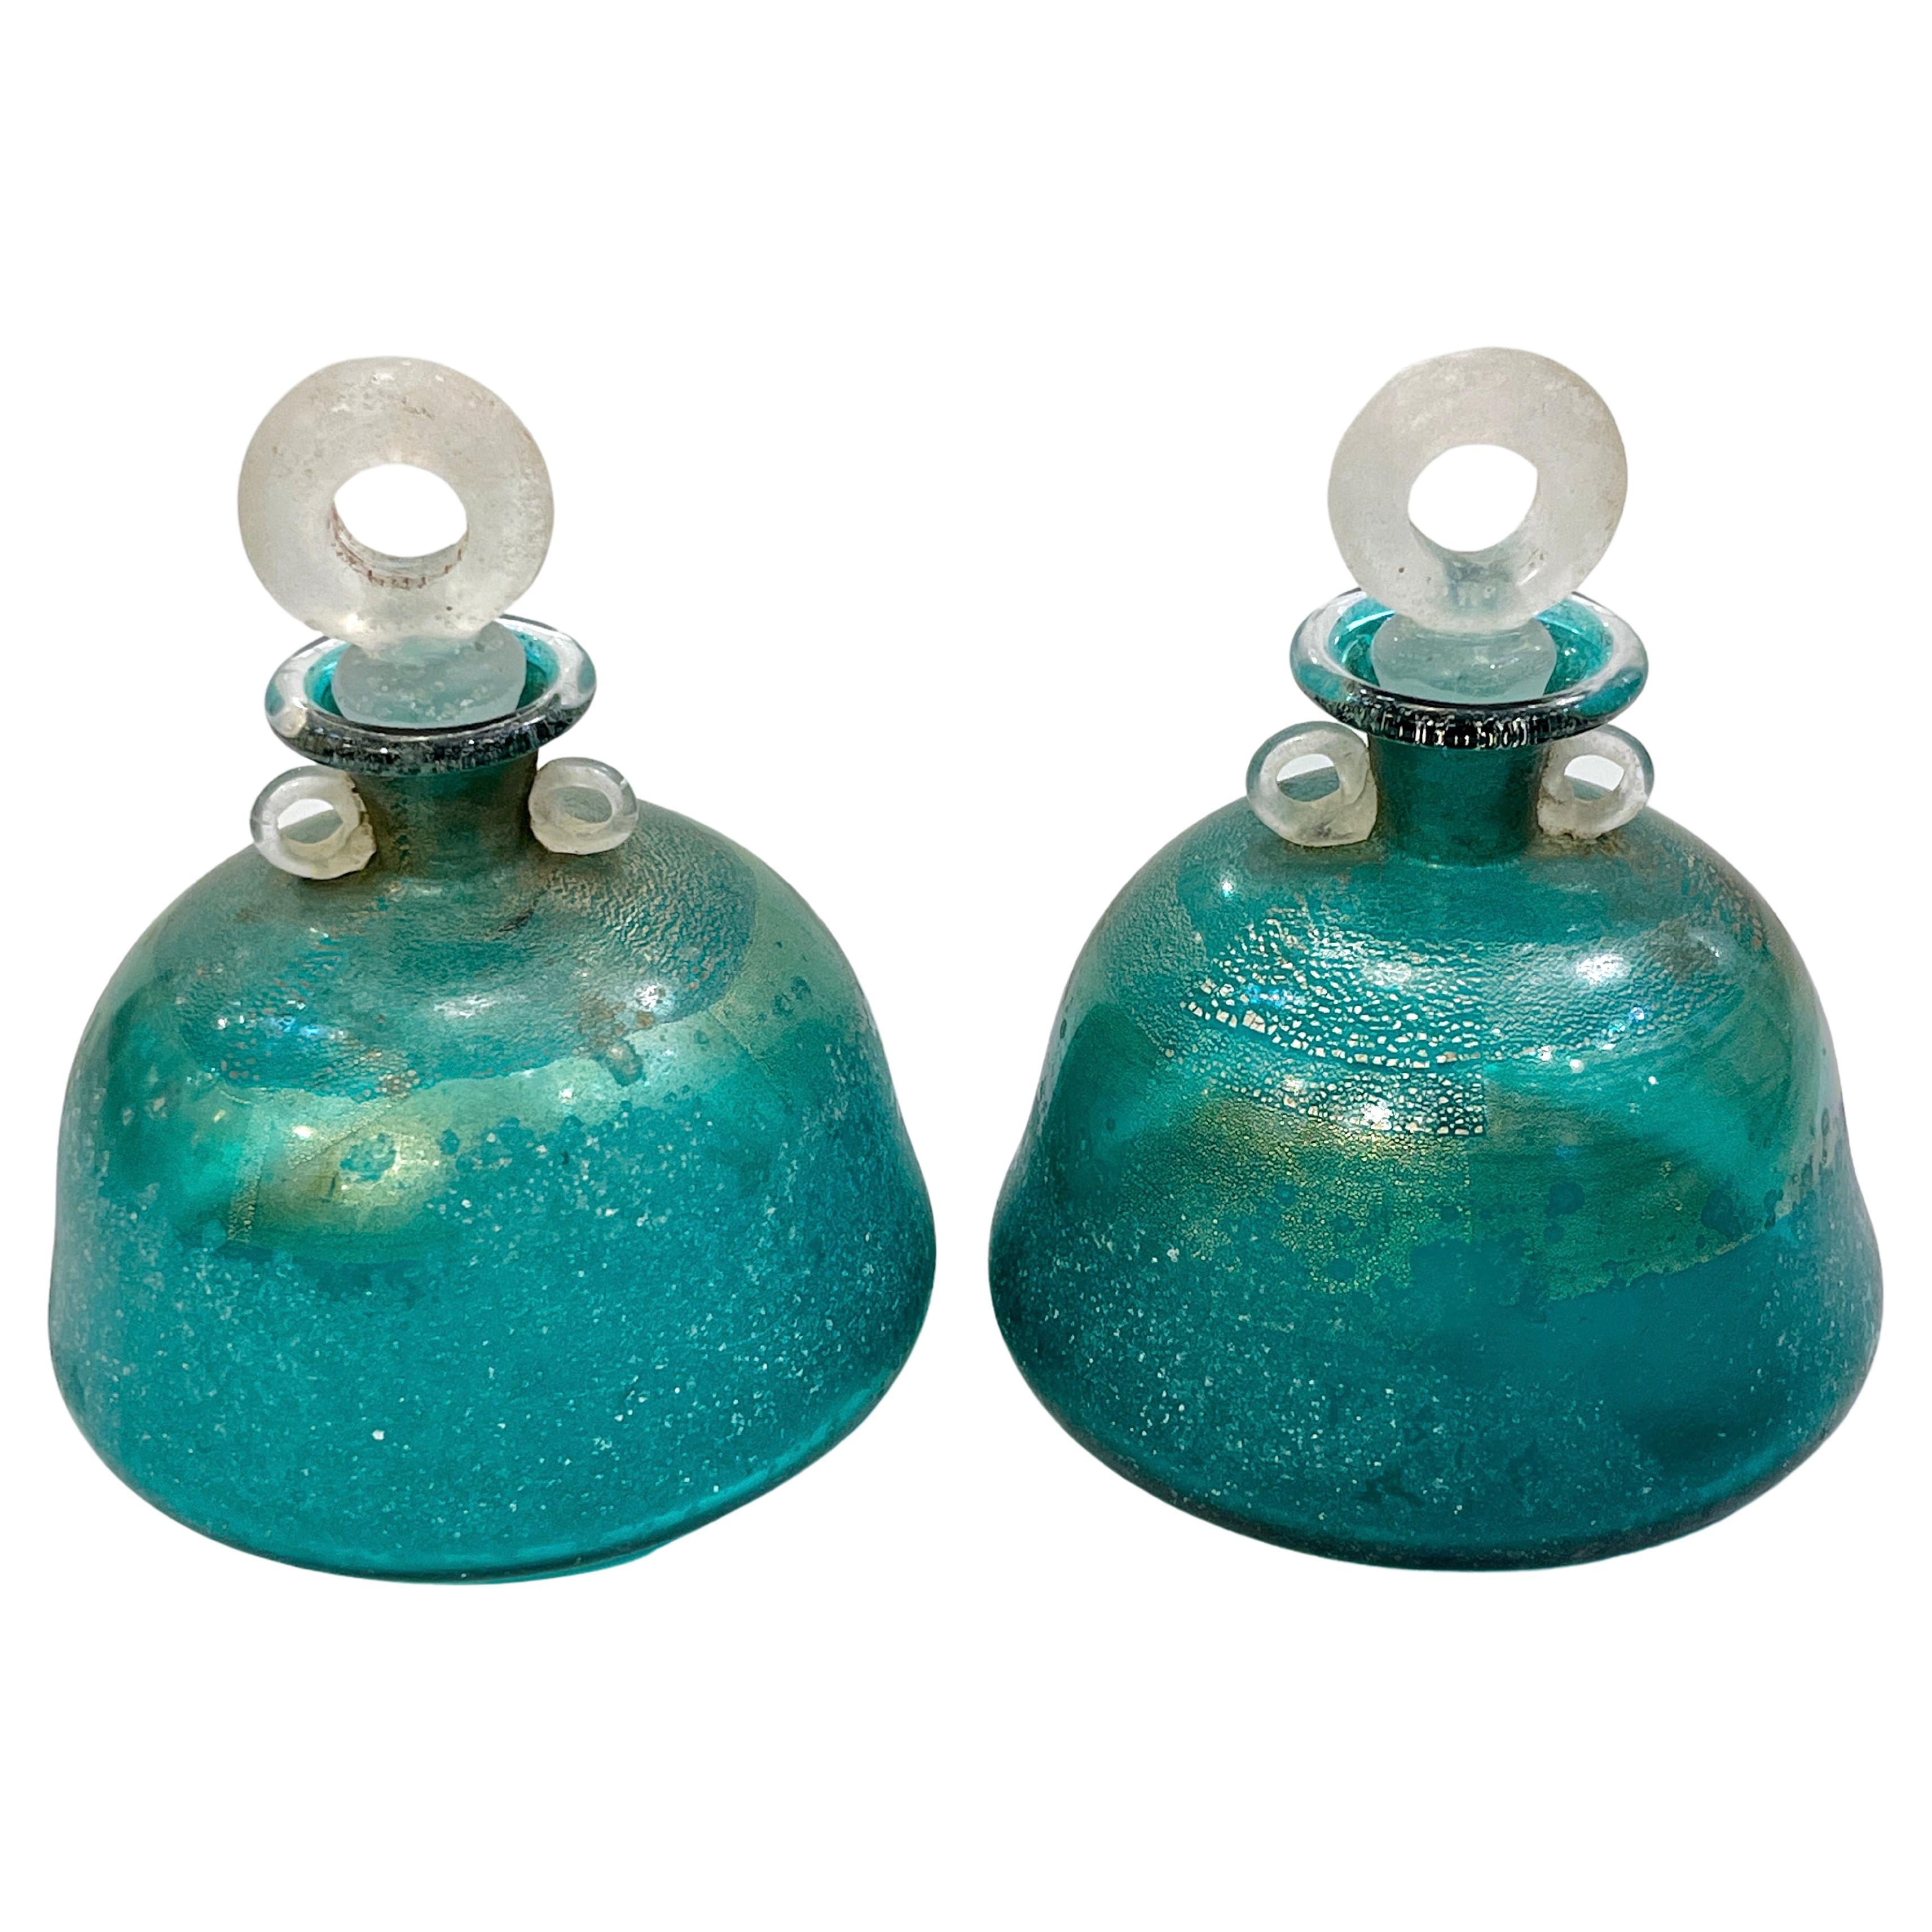 1970s Italian Signed Scavo Murano Glass Green Bottles with Handles and Stoppers For Sale